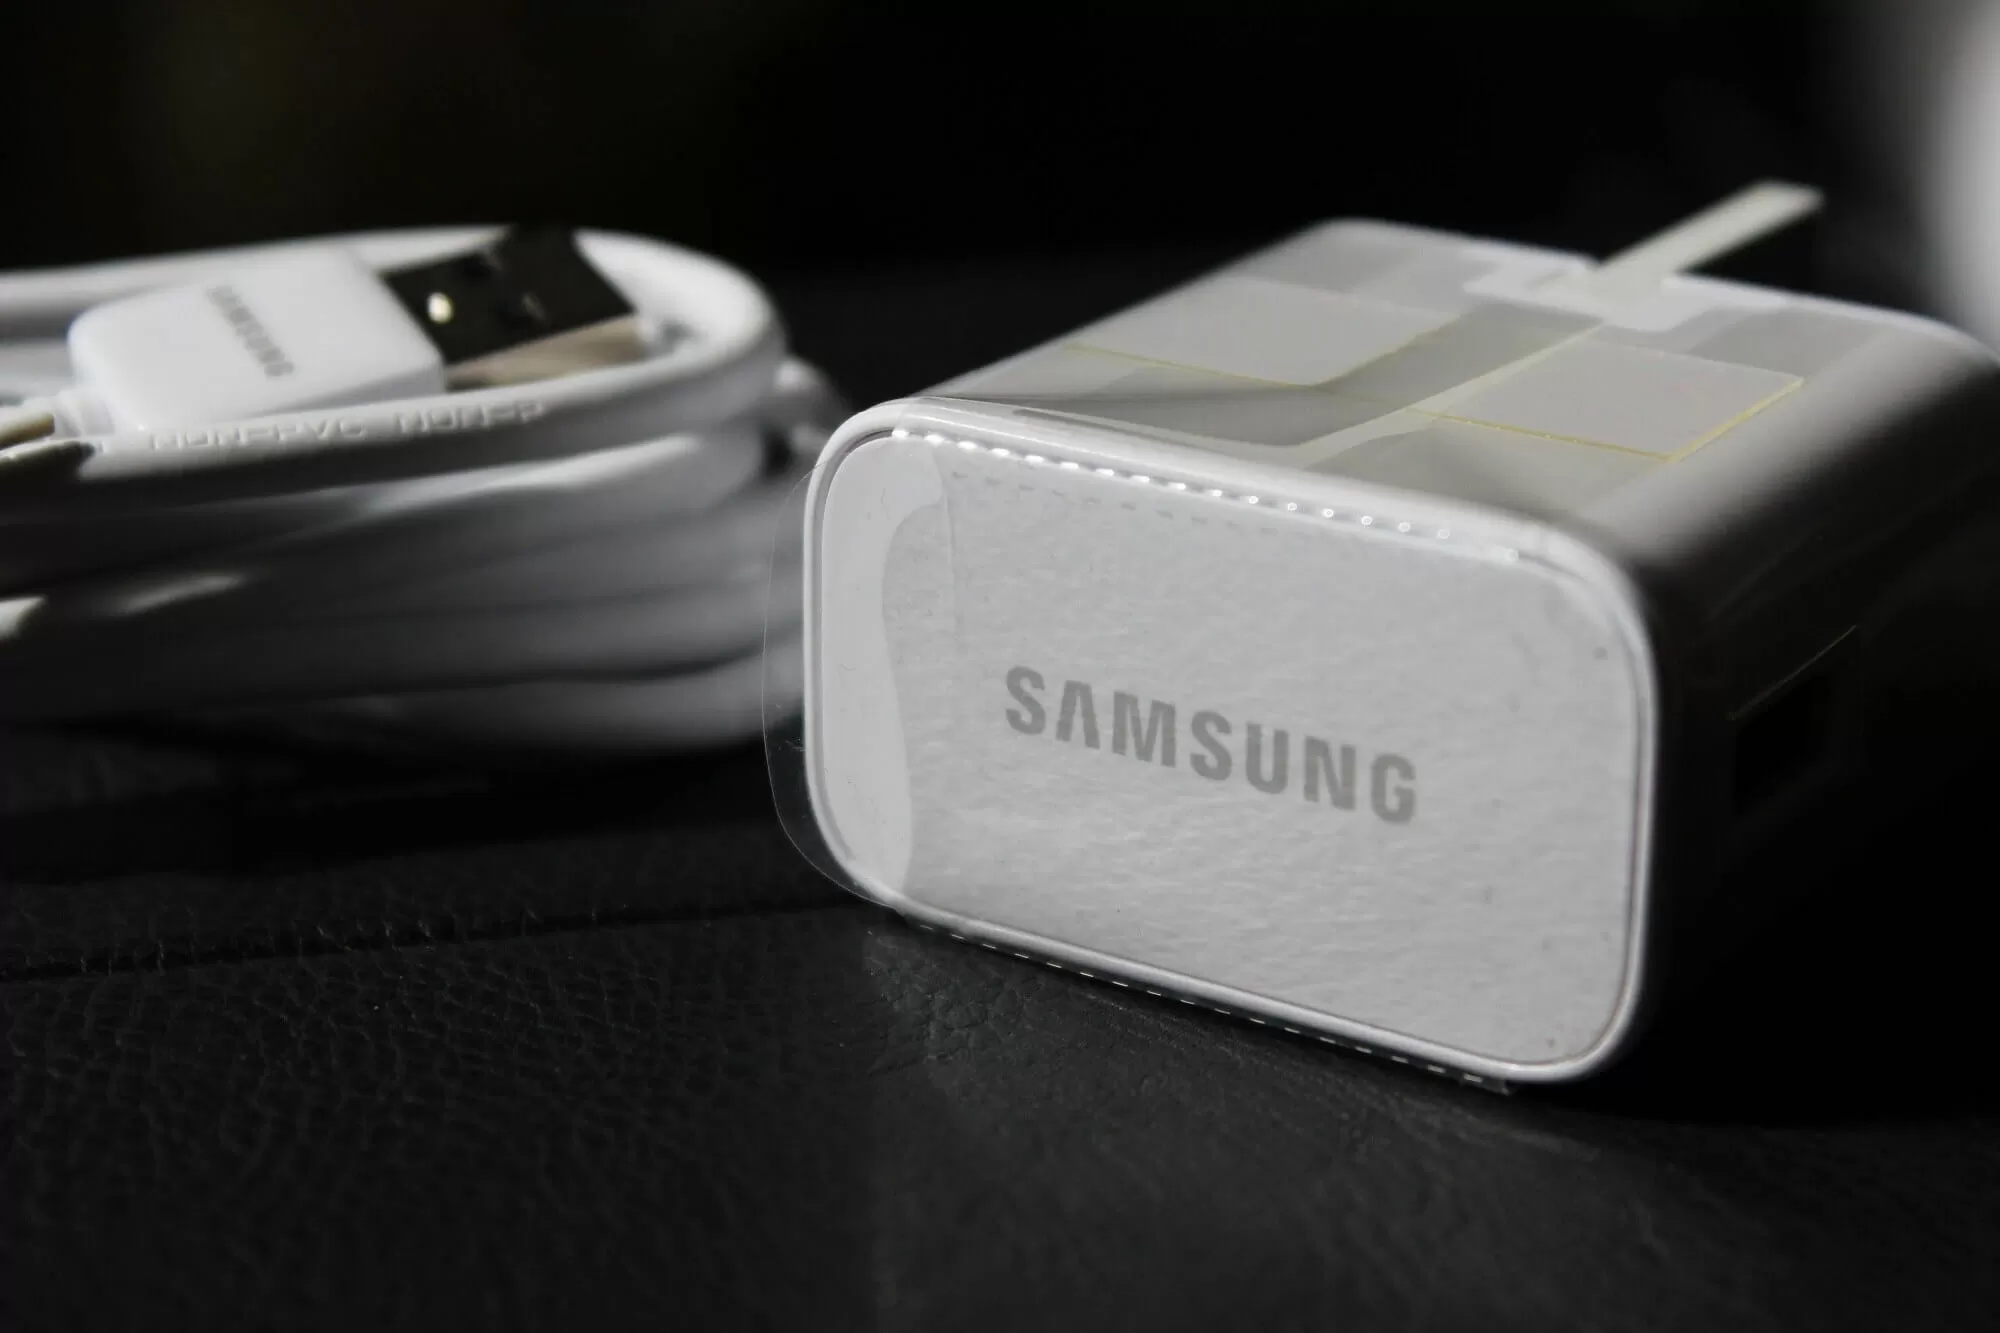 Samsung confirms it is phasing out chargers and headphones from future devices